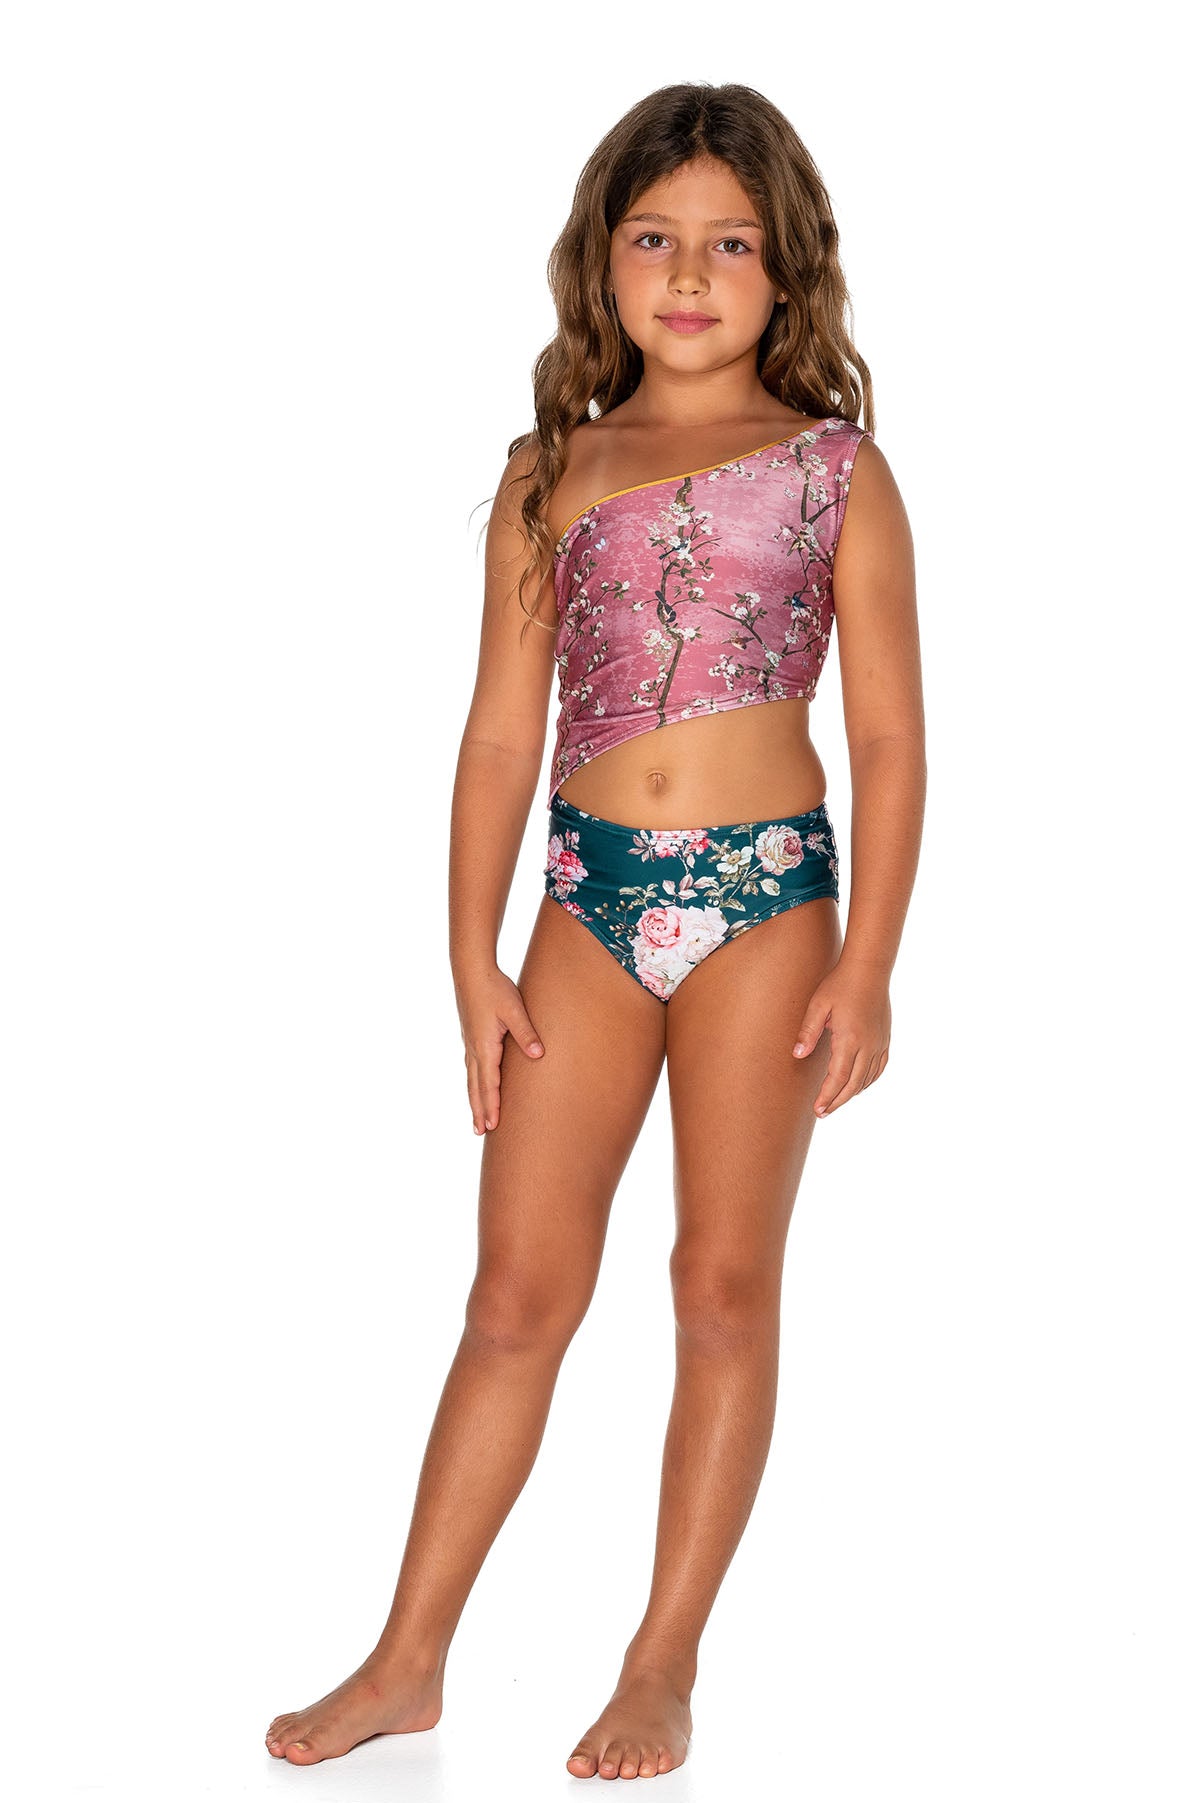 Girls One Piece Swimsuit - Pink Floral - Passionate - Front